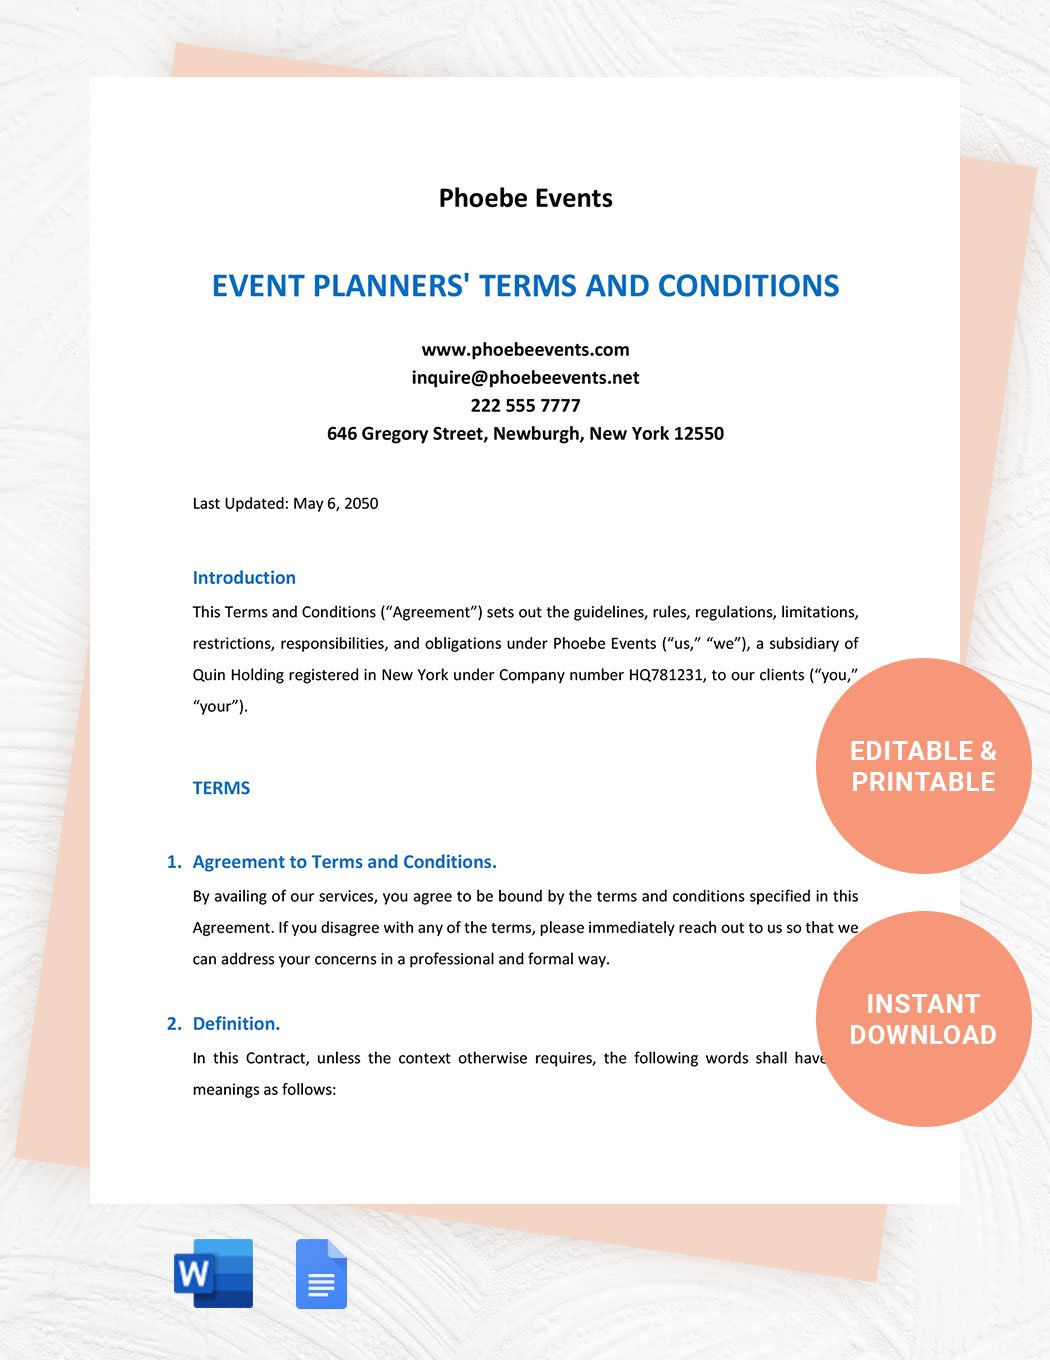 Terms And Conditions Template For Event Planners in Word, Google Docs